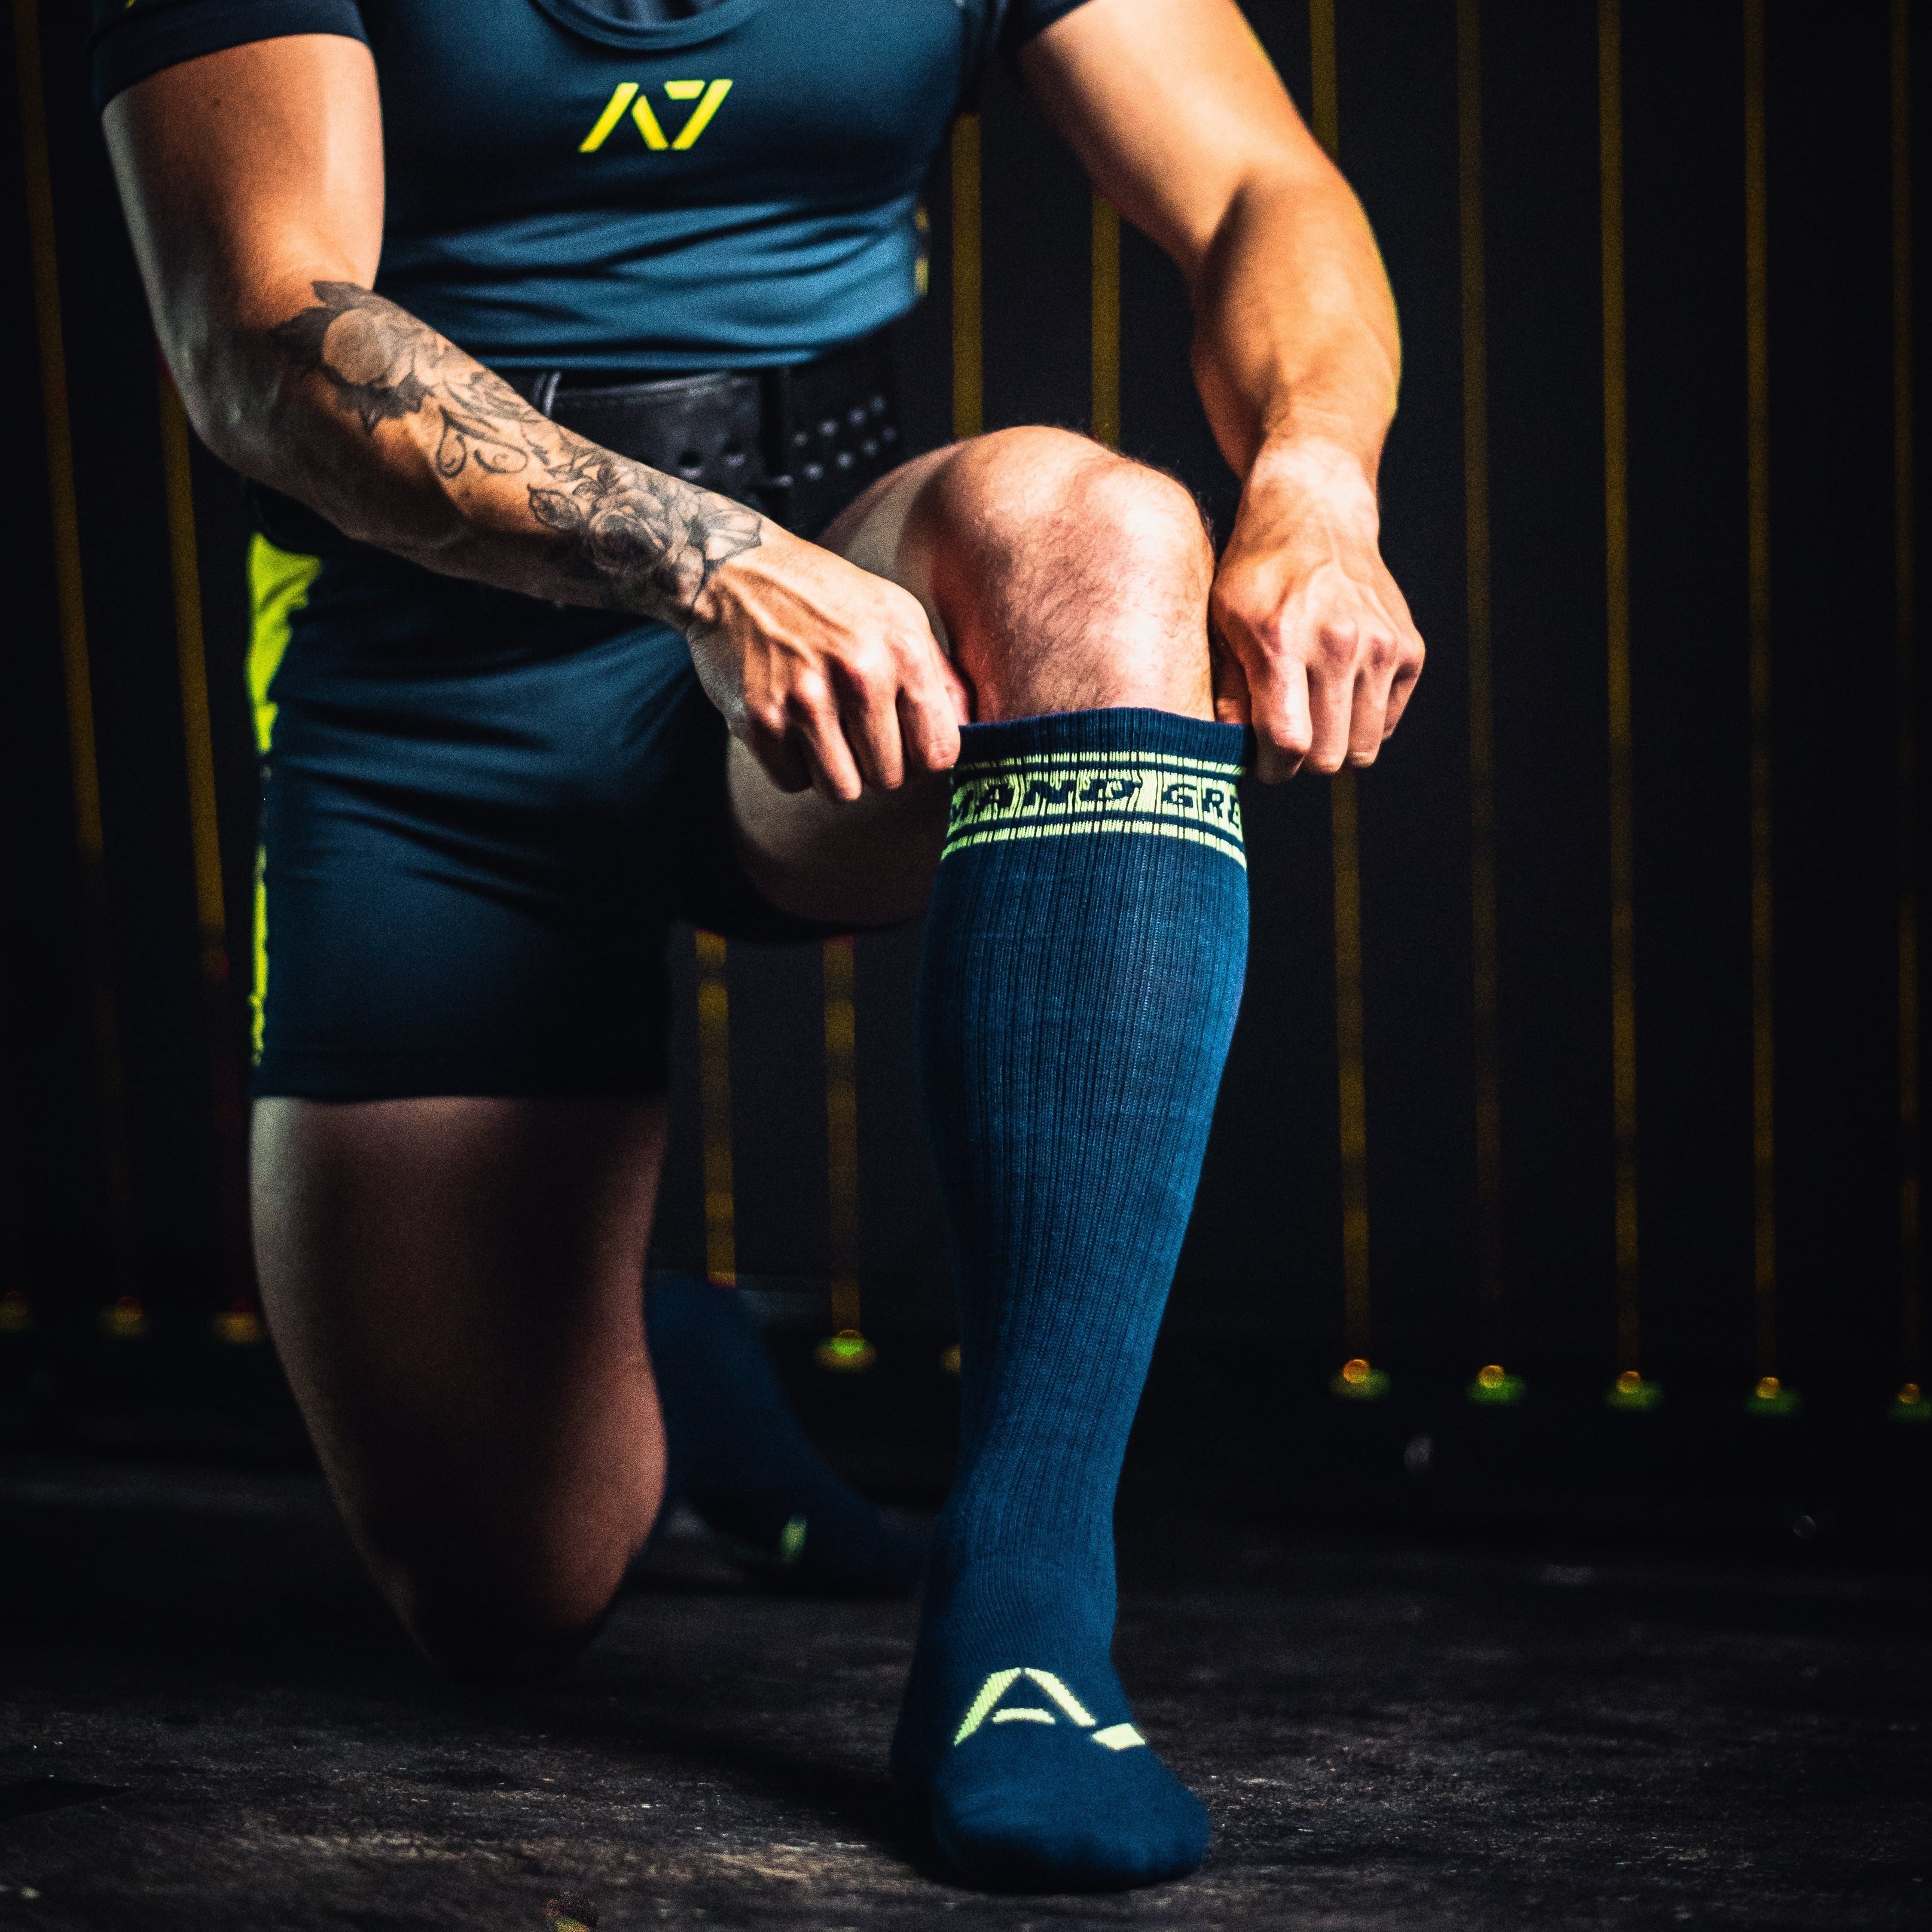 Your feet are important and durable deadlift socks are just as importing when doing SBD. These deadlift socks have compression benefits and arch support as well as being IPF Approved with their IPF approved logo. These deadlift socks are perfect for Powerlifting, weightlifting, strongman and all your strength sports needs. The perfect sock for your IPF Approved Kit. Shipping to Europe and the UK, Norway, Switzerland and Iceland.